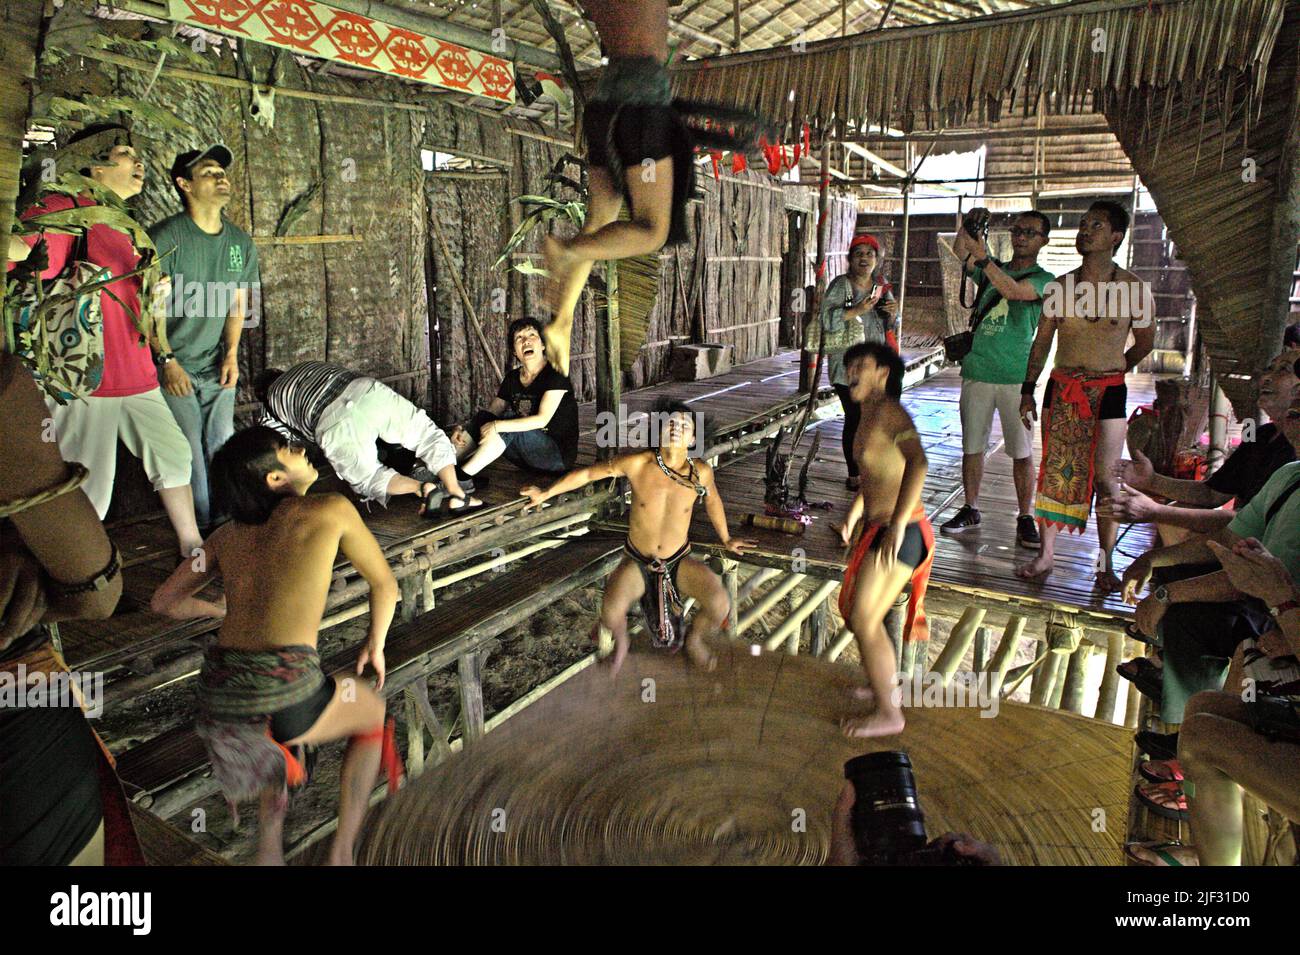 Tourism workers wearing indigenous attires are tumbling on a round trampoline made of rattan at Mari Mari Cultural Village, a village that is designed to showcase the cultures of five ethnic groups of Sabah—a Malaysian state in North Borneo, which is located on the outskirts of Kota Kinabalu in Sabah, Malaysia. Stock Photo